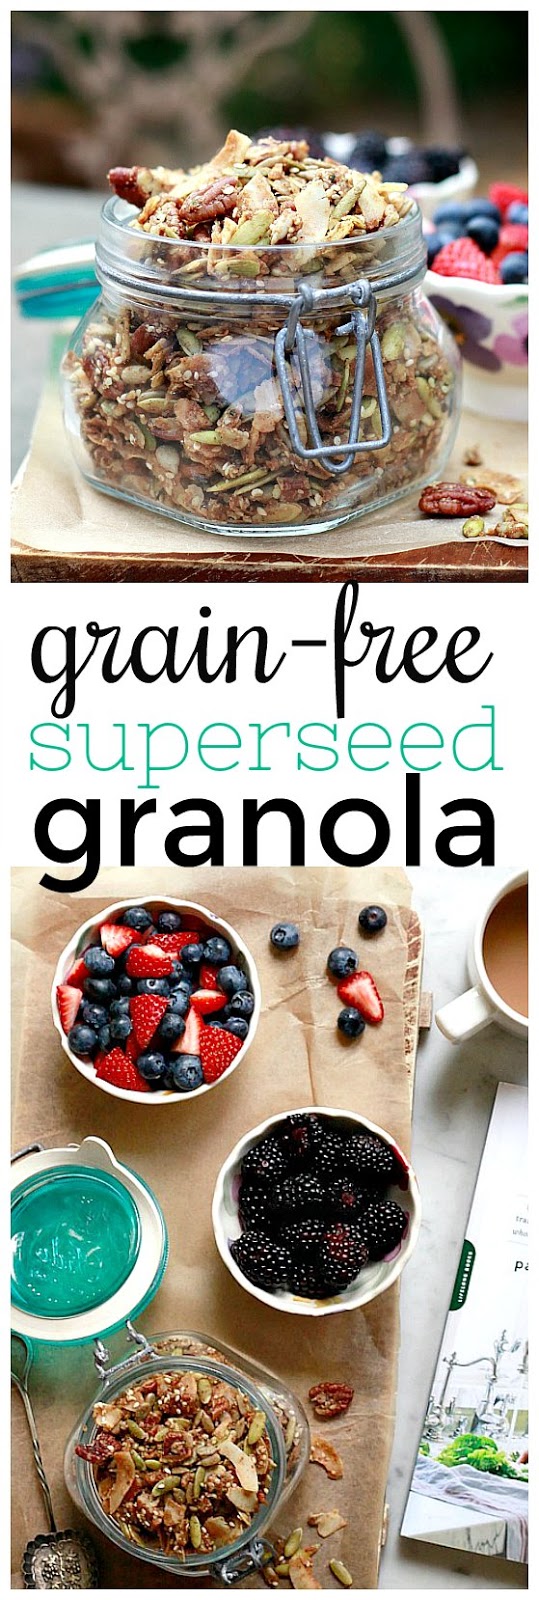 This easy grain-free granola recipe is loaded with seeds, nuts, and coconut and makes a delicious and healthful vegan, paleo breakfast or snack. It's also a great DIY edible gift idea.